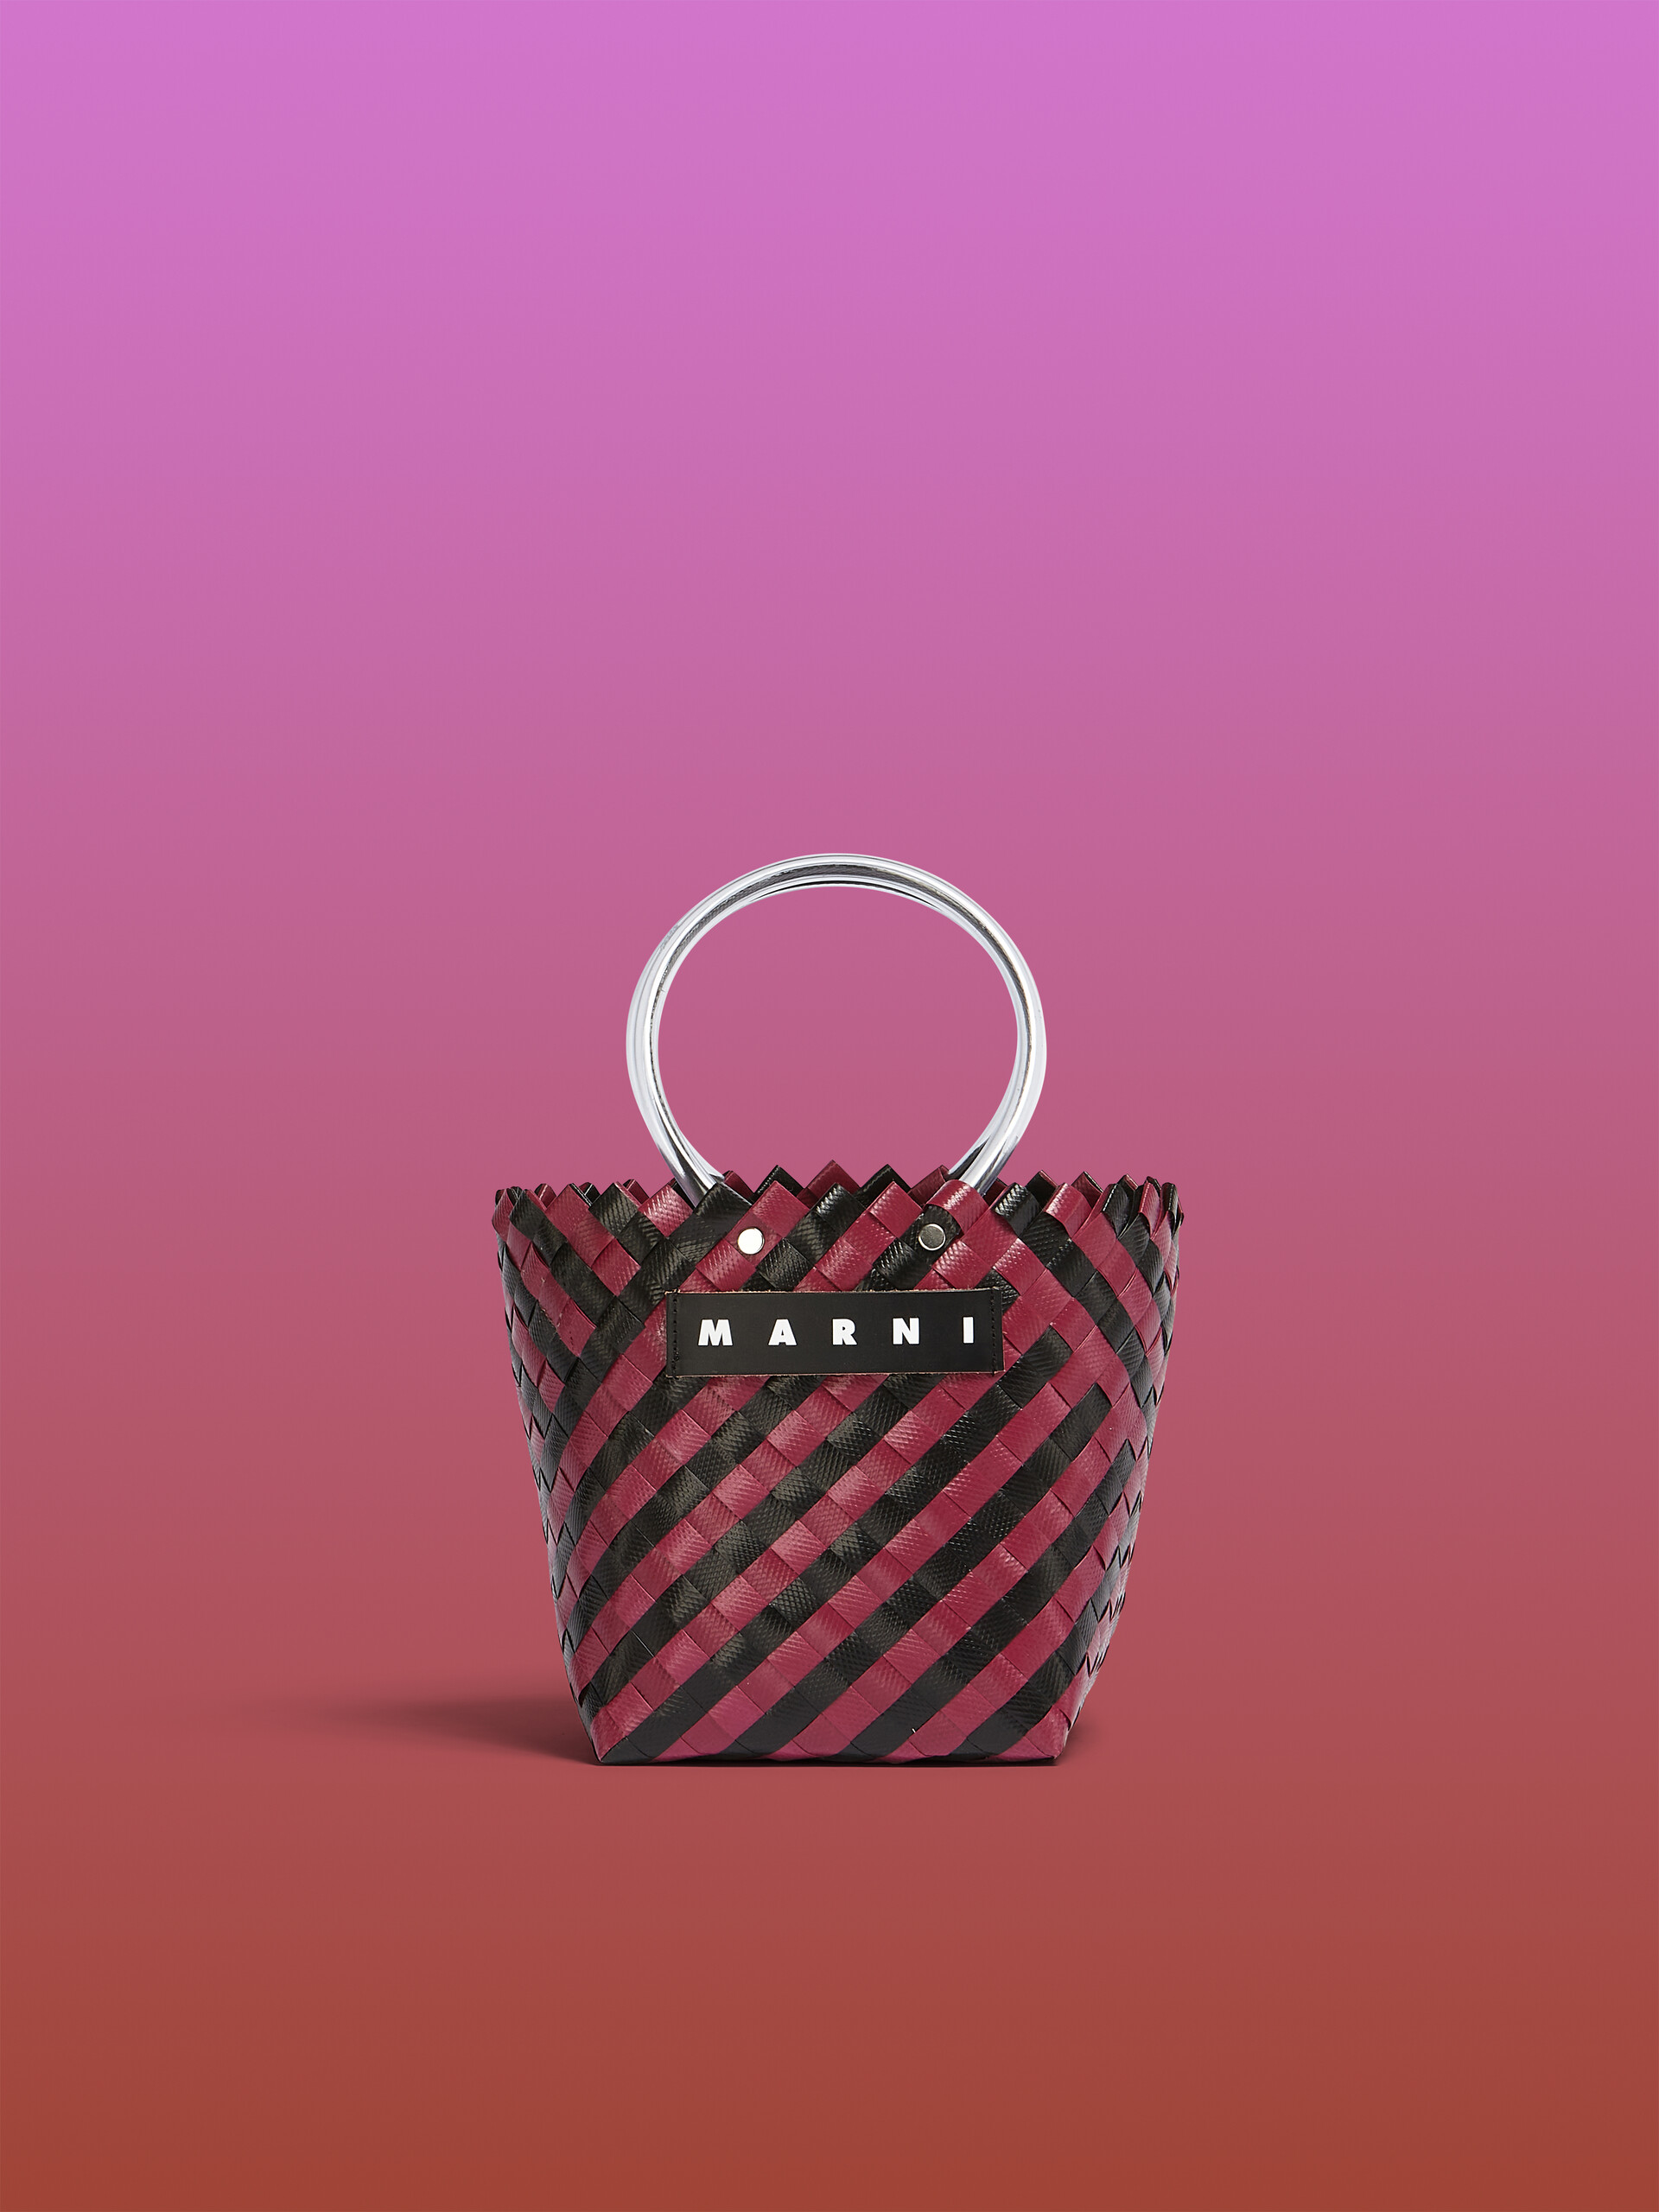 MARNI MARKET bag in black and burgundy woven material - Bags - Image 1